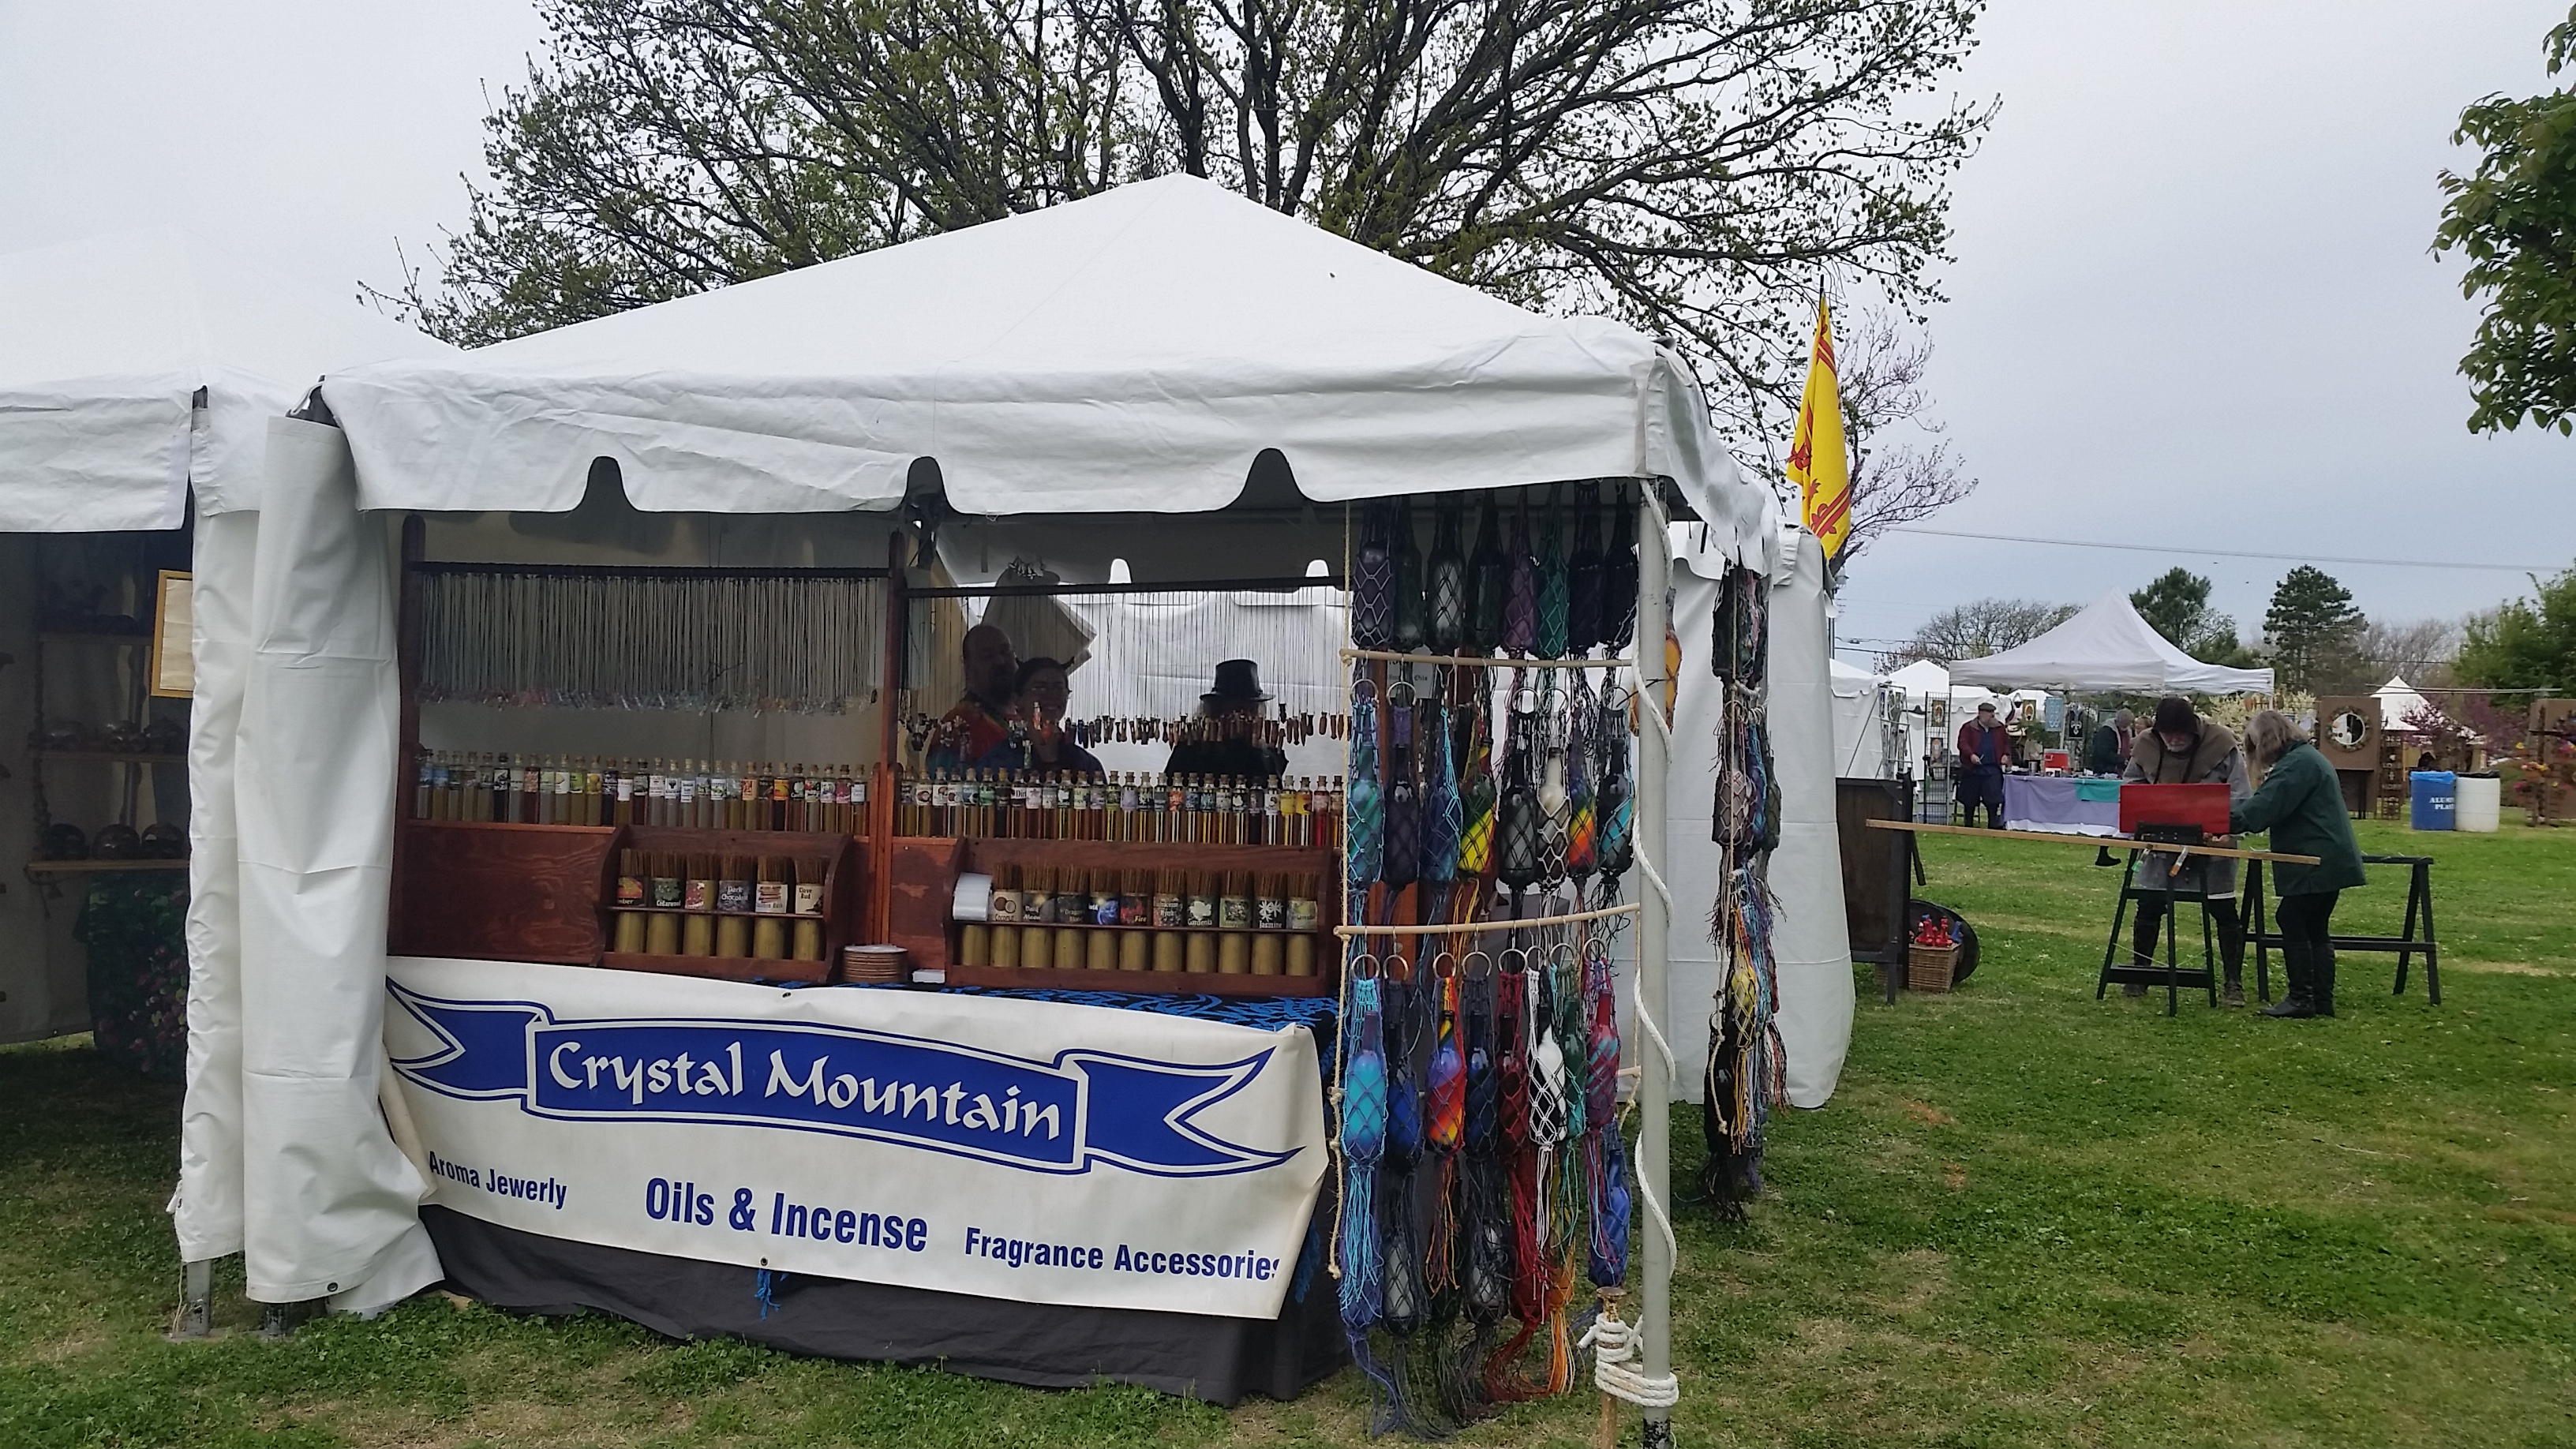 Crystal Mountain at the Norman Medieval Faire in Norman, Oklahoma